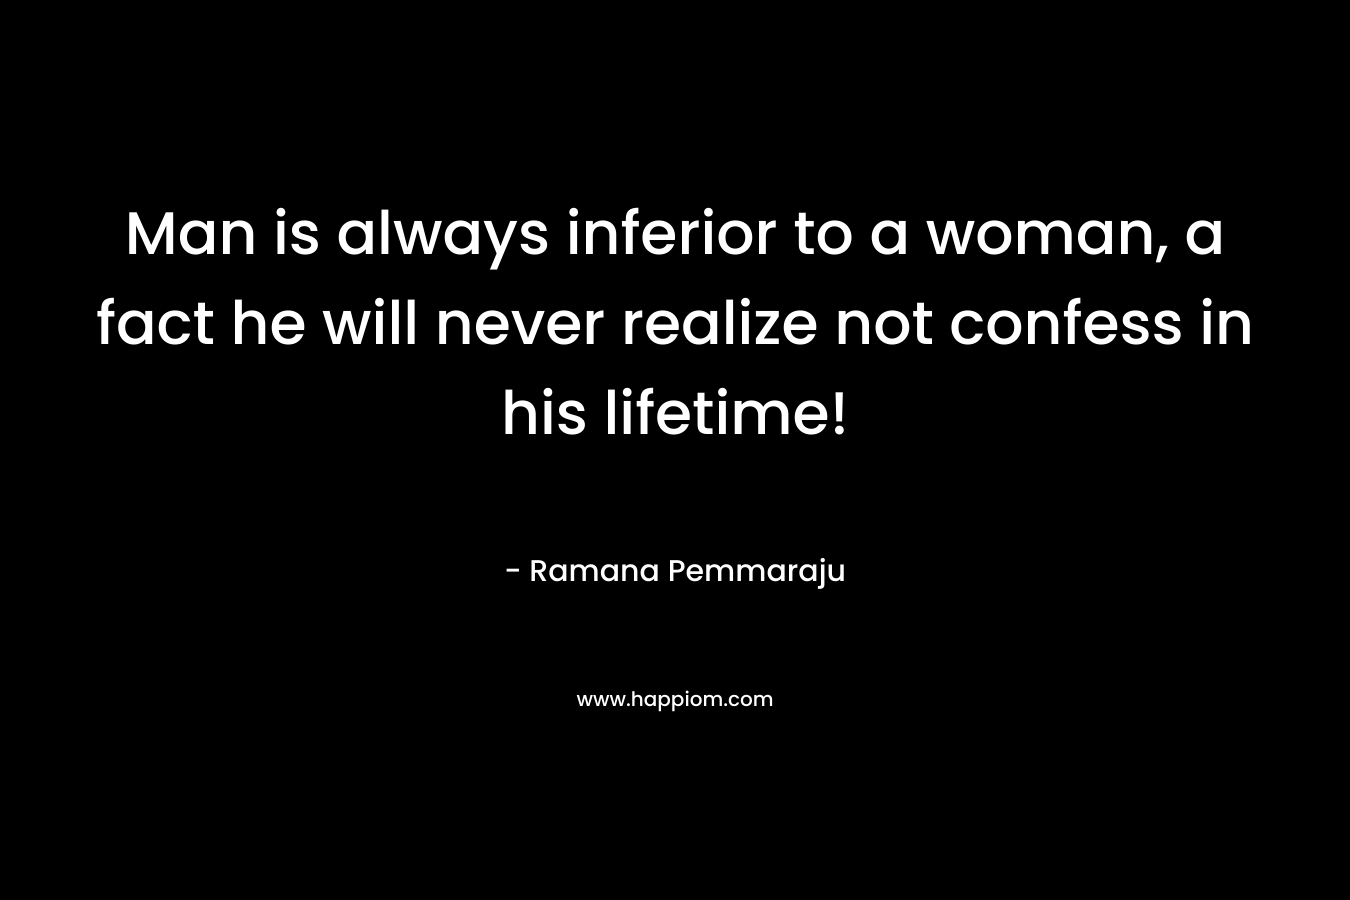 Man is always inferior to a woman, a fact he will never realize not confess in his lifetime!